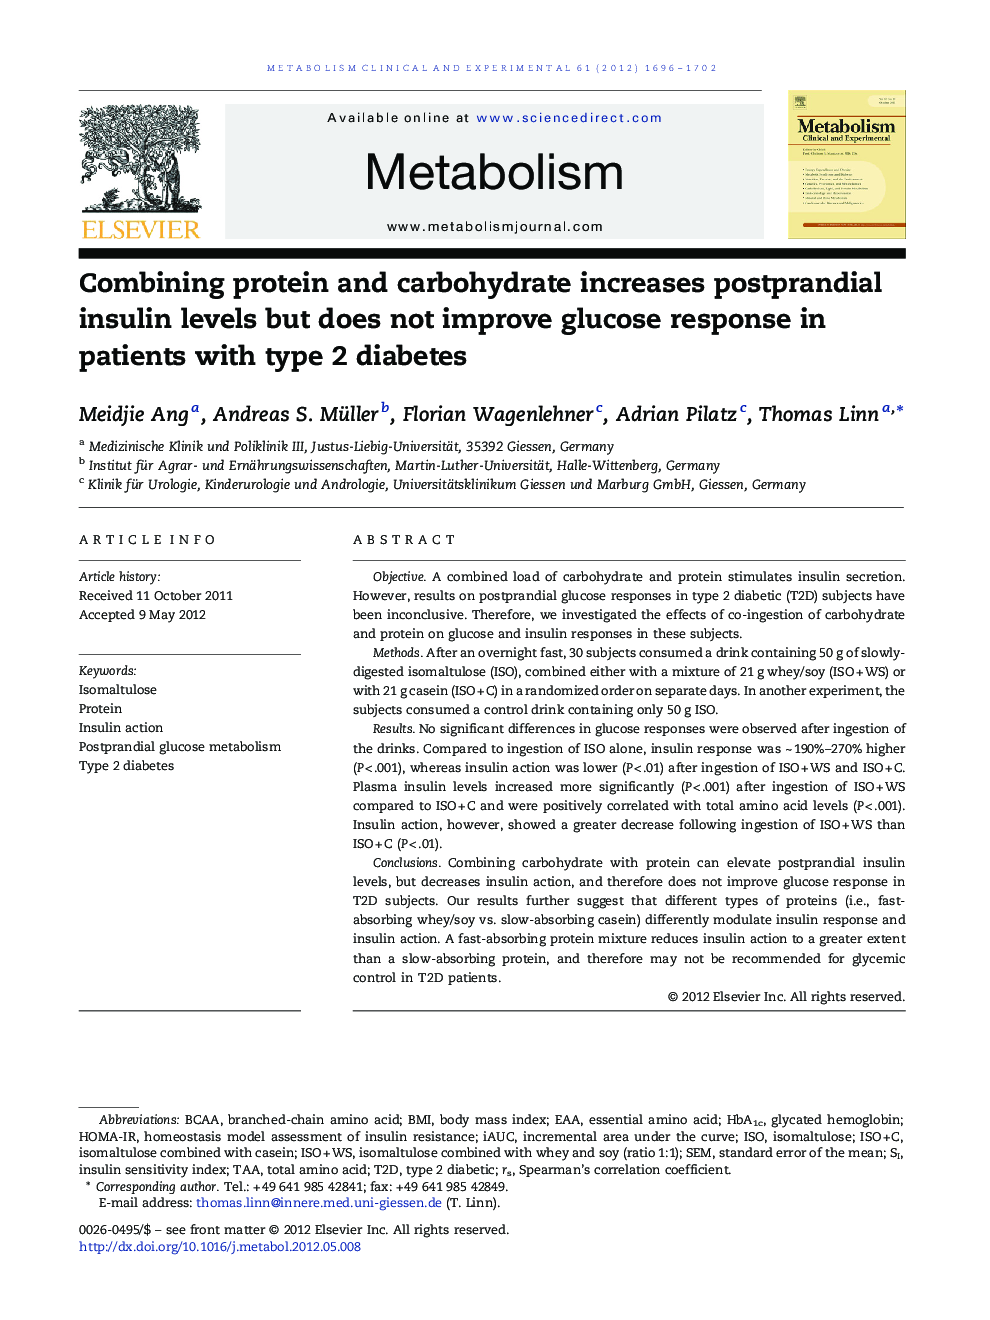 Combining protein and carbohydrate increases postprandial insulin levels but does not improve glucose response in patients with type 2 diabetes